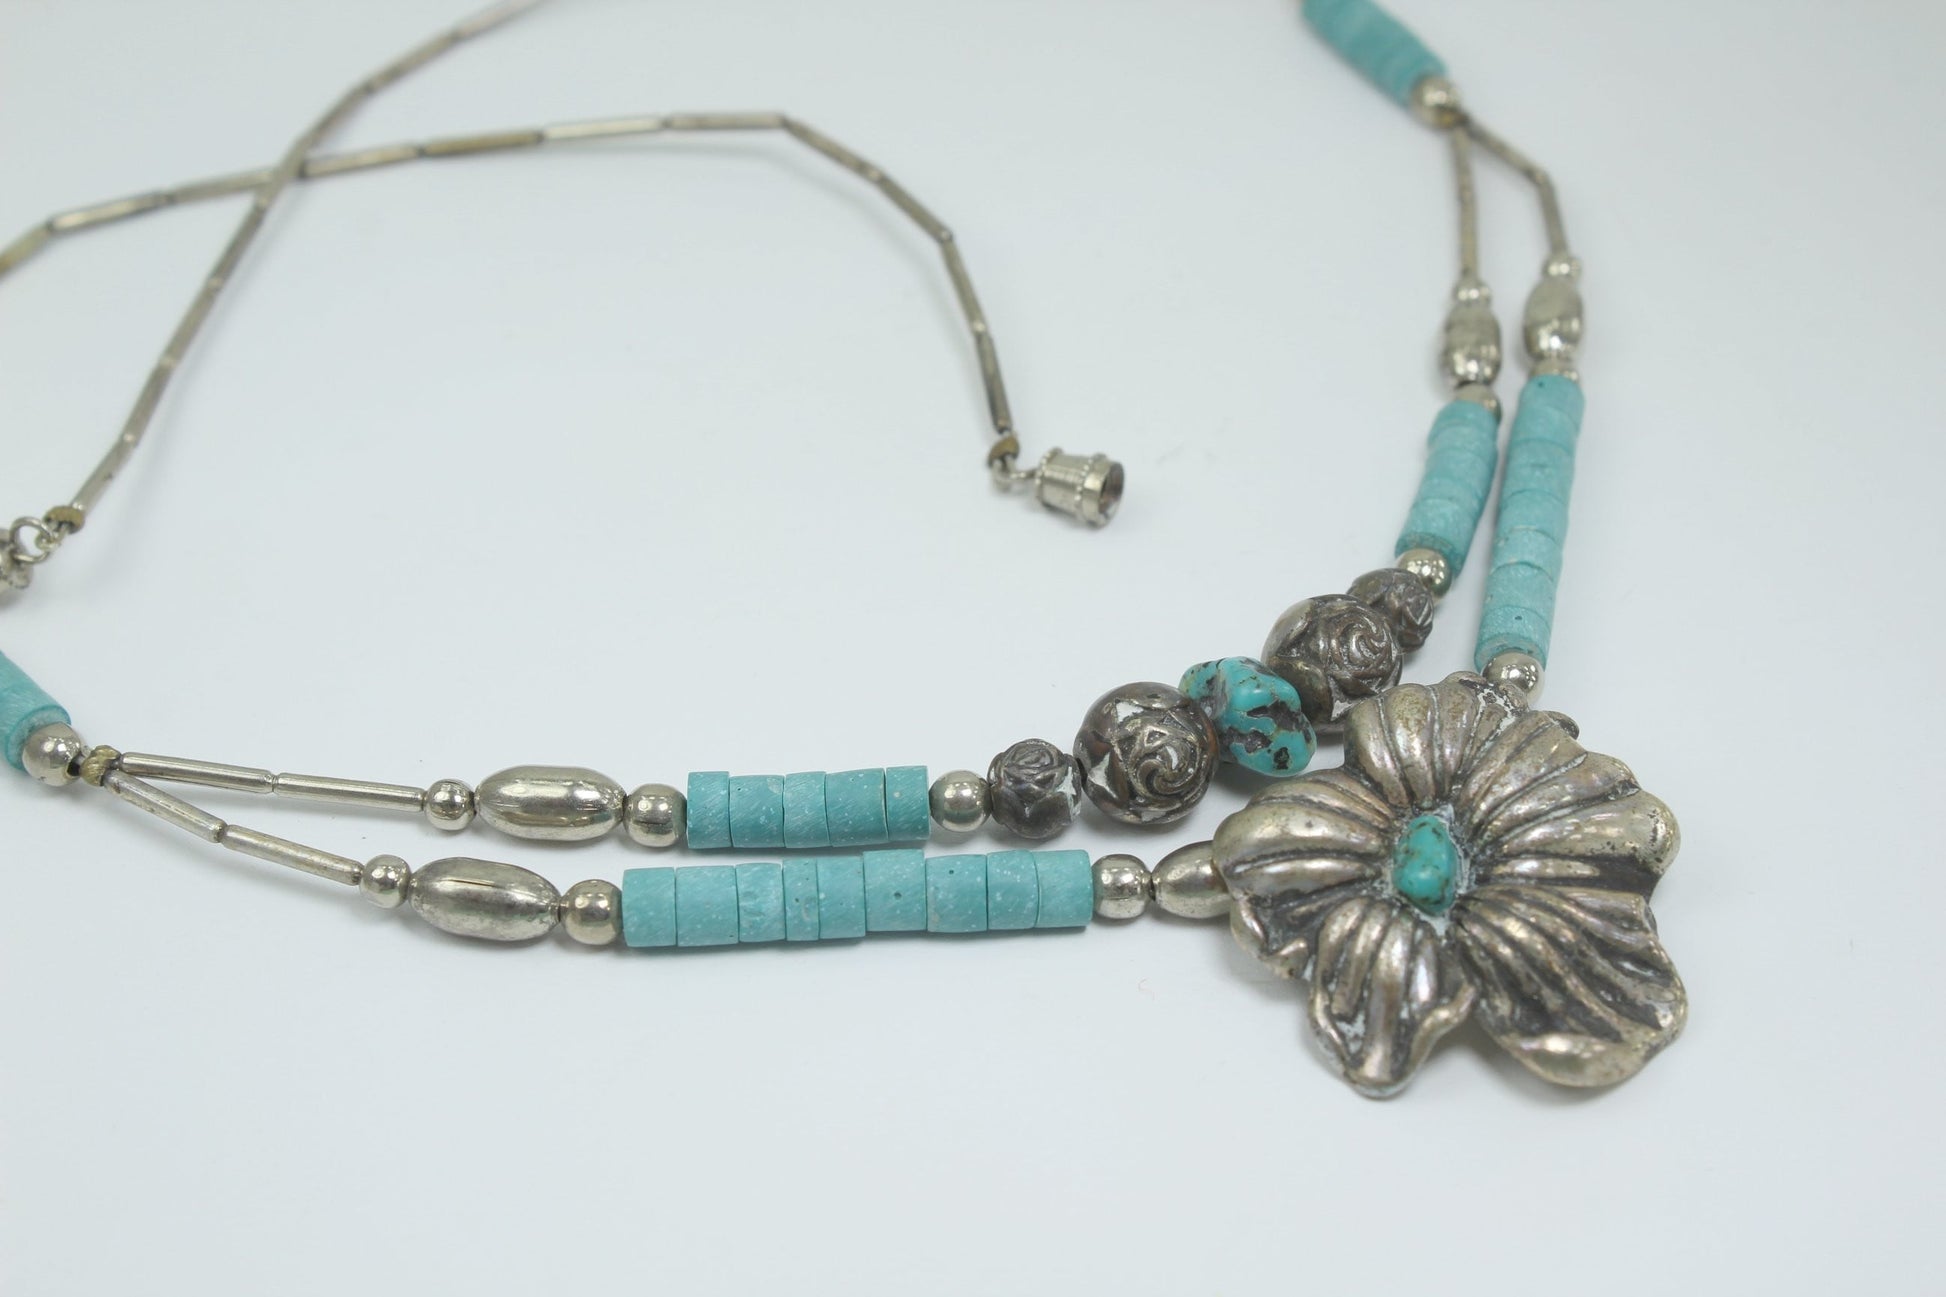 Southwest Necklace Turquoise Silver Beads Flower Focal 2 Strand roses